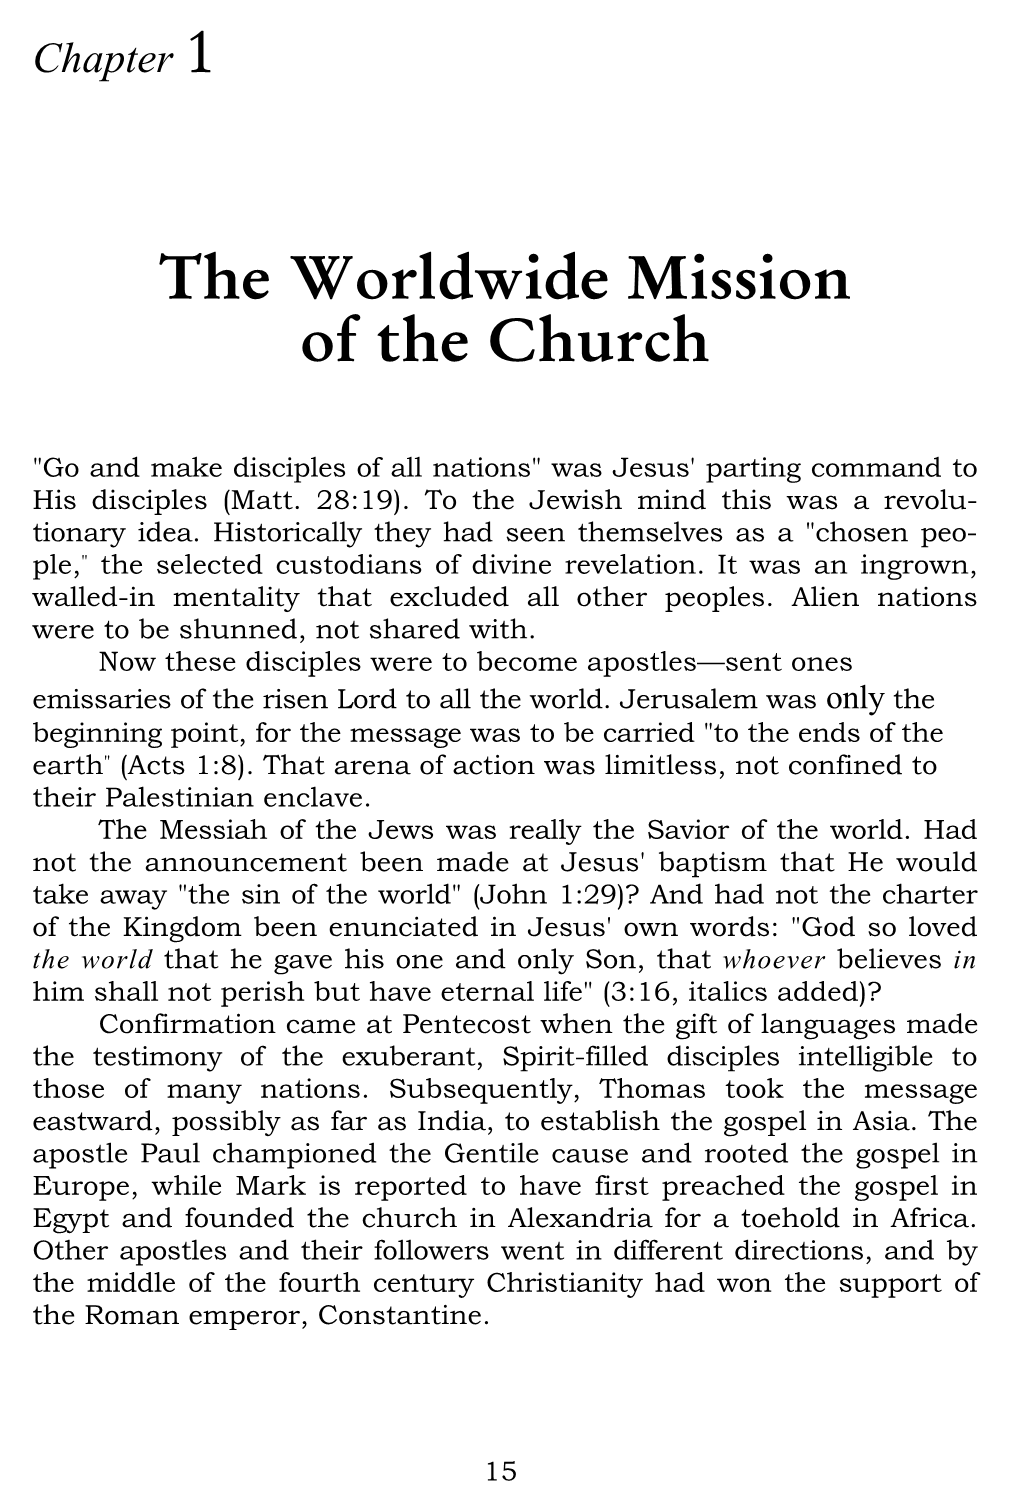 The Worldwide Mission of the Church